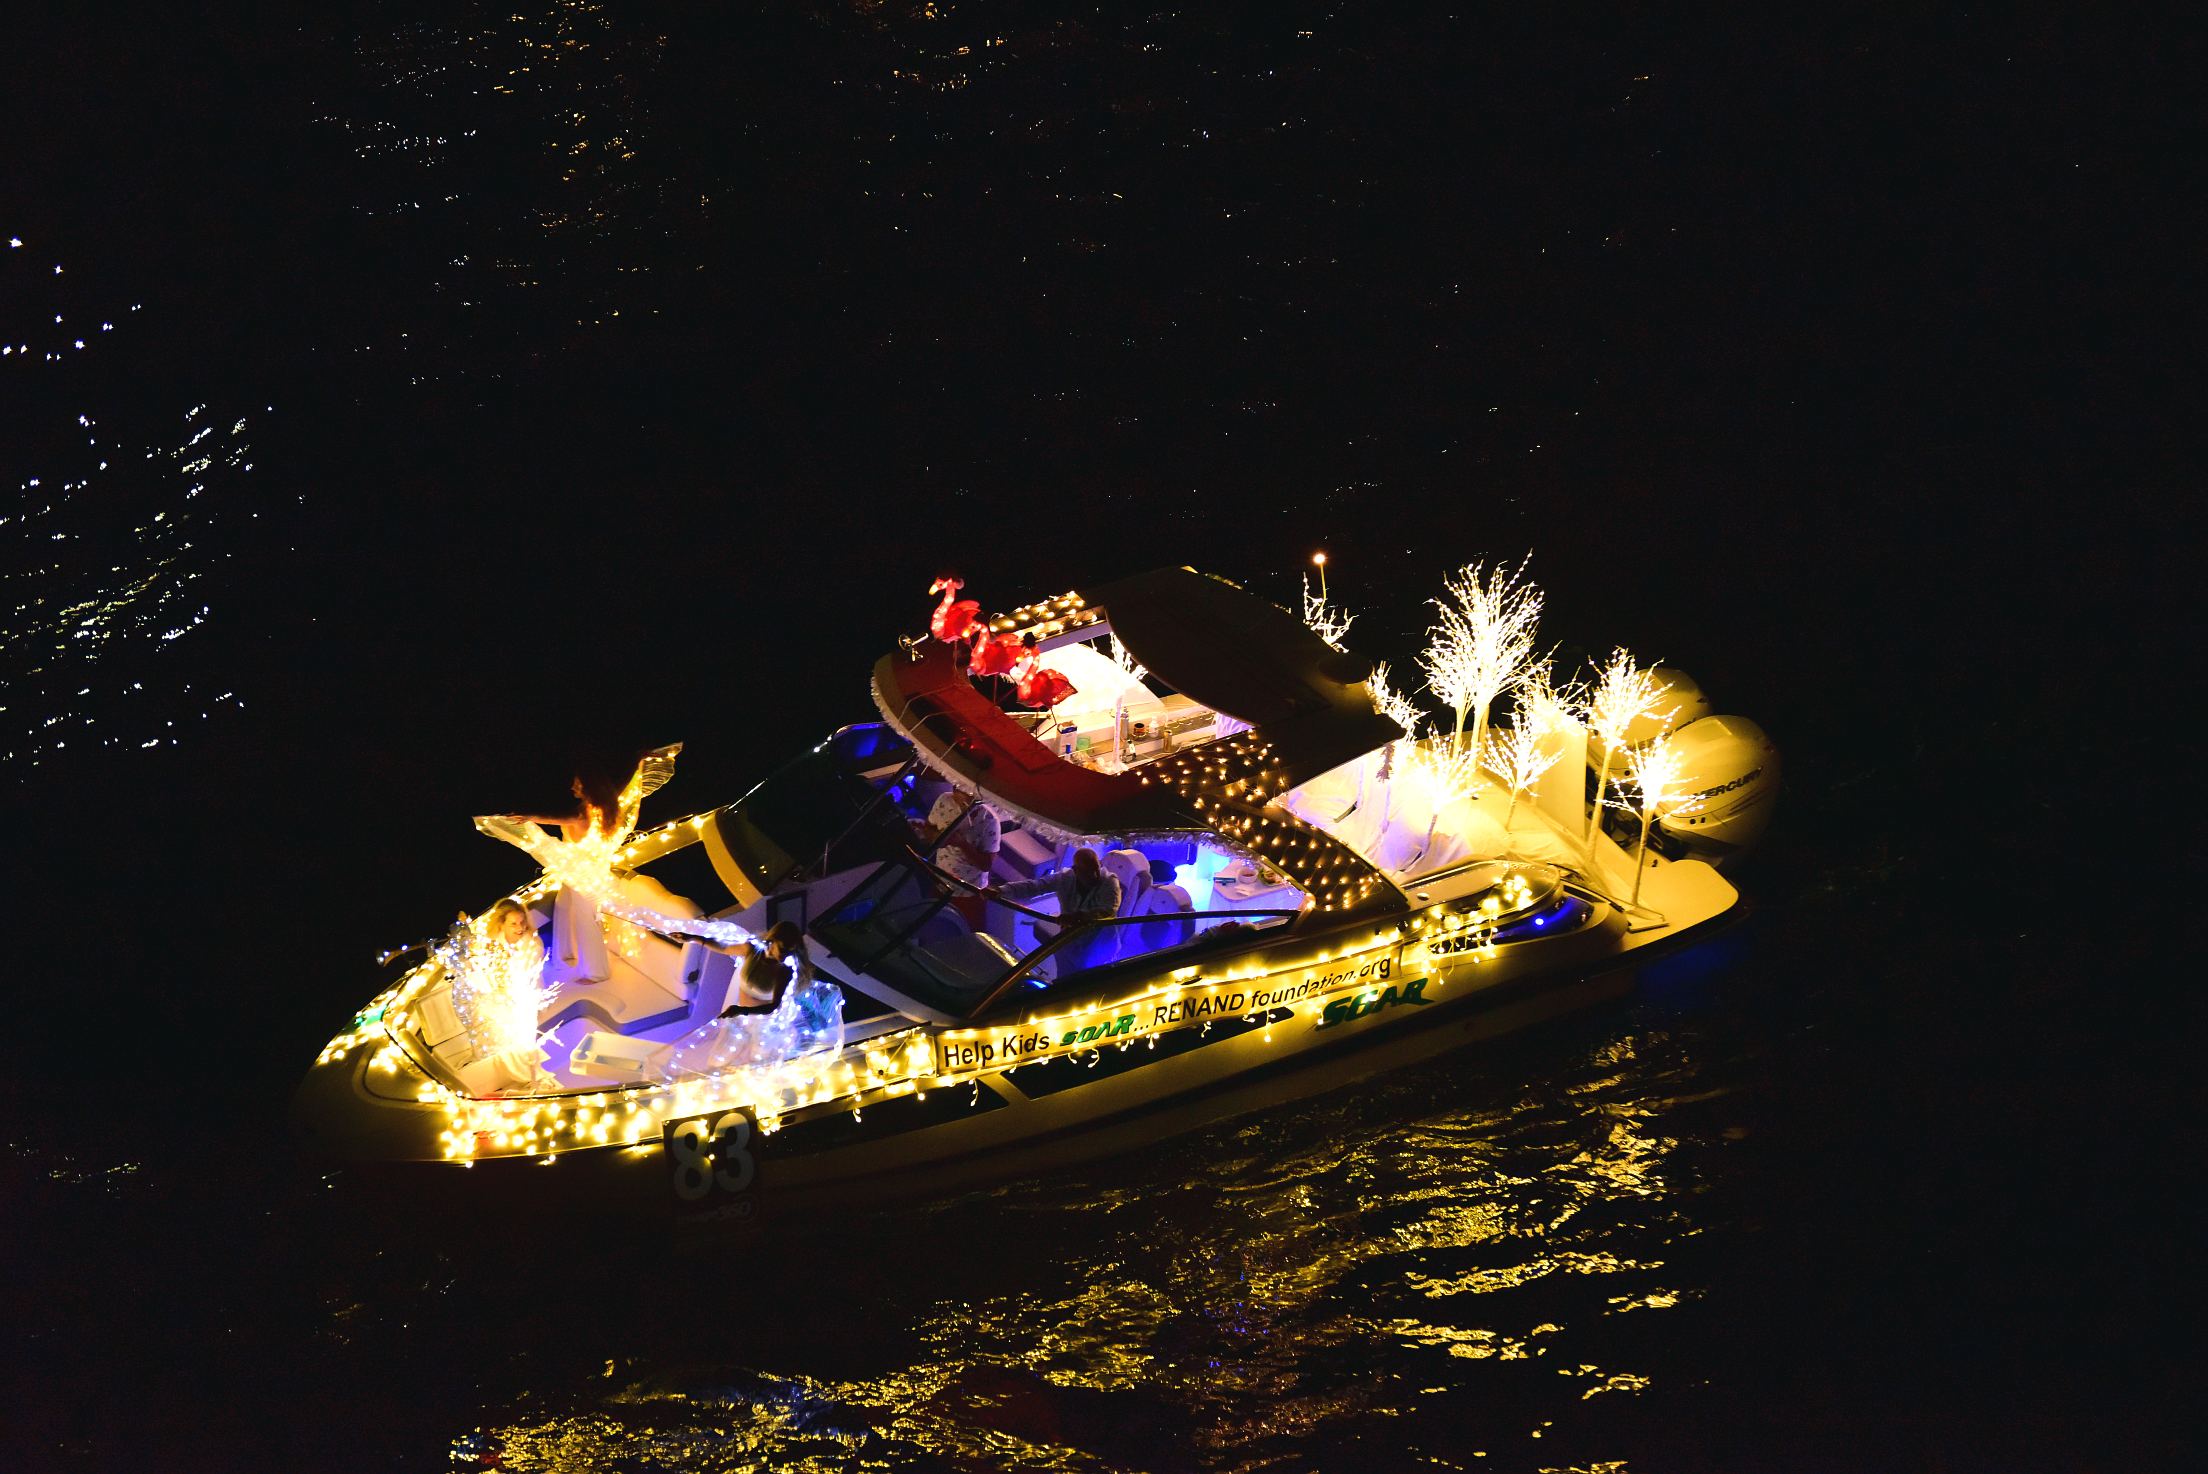 Renand Foundation on board Soar, boat number 83 in the 2021 Winterfest Boat Parade